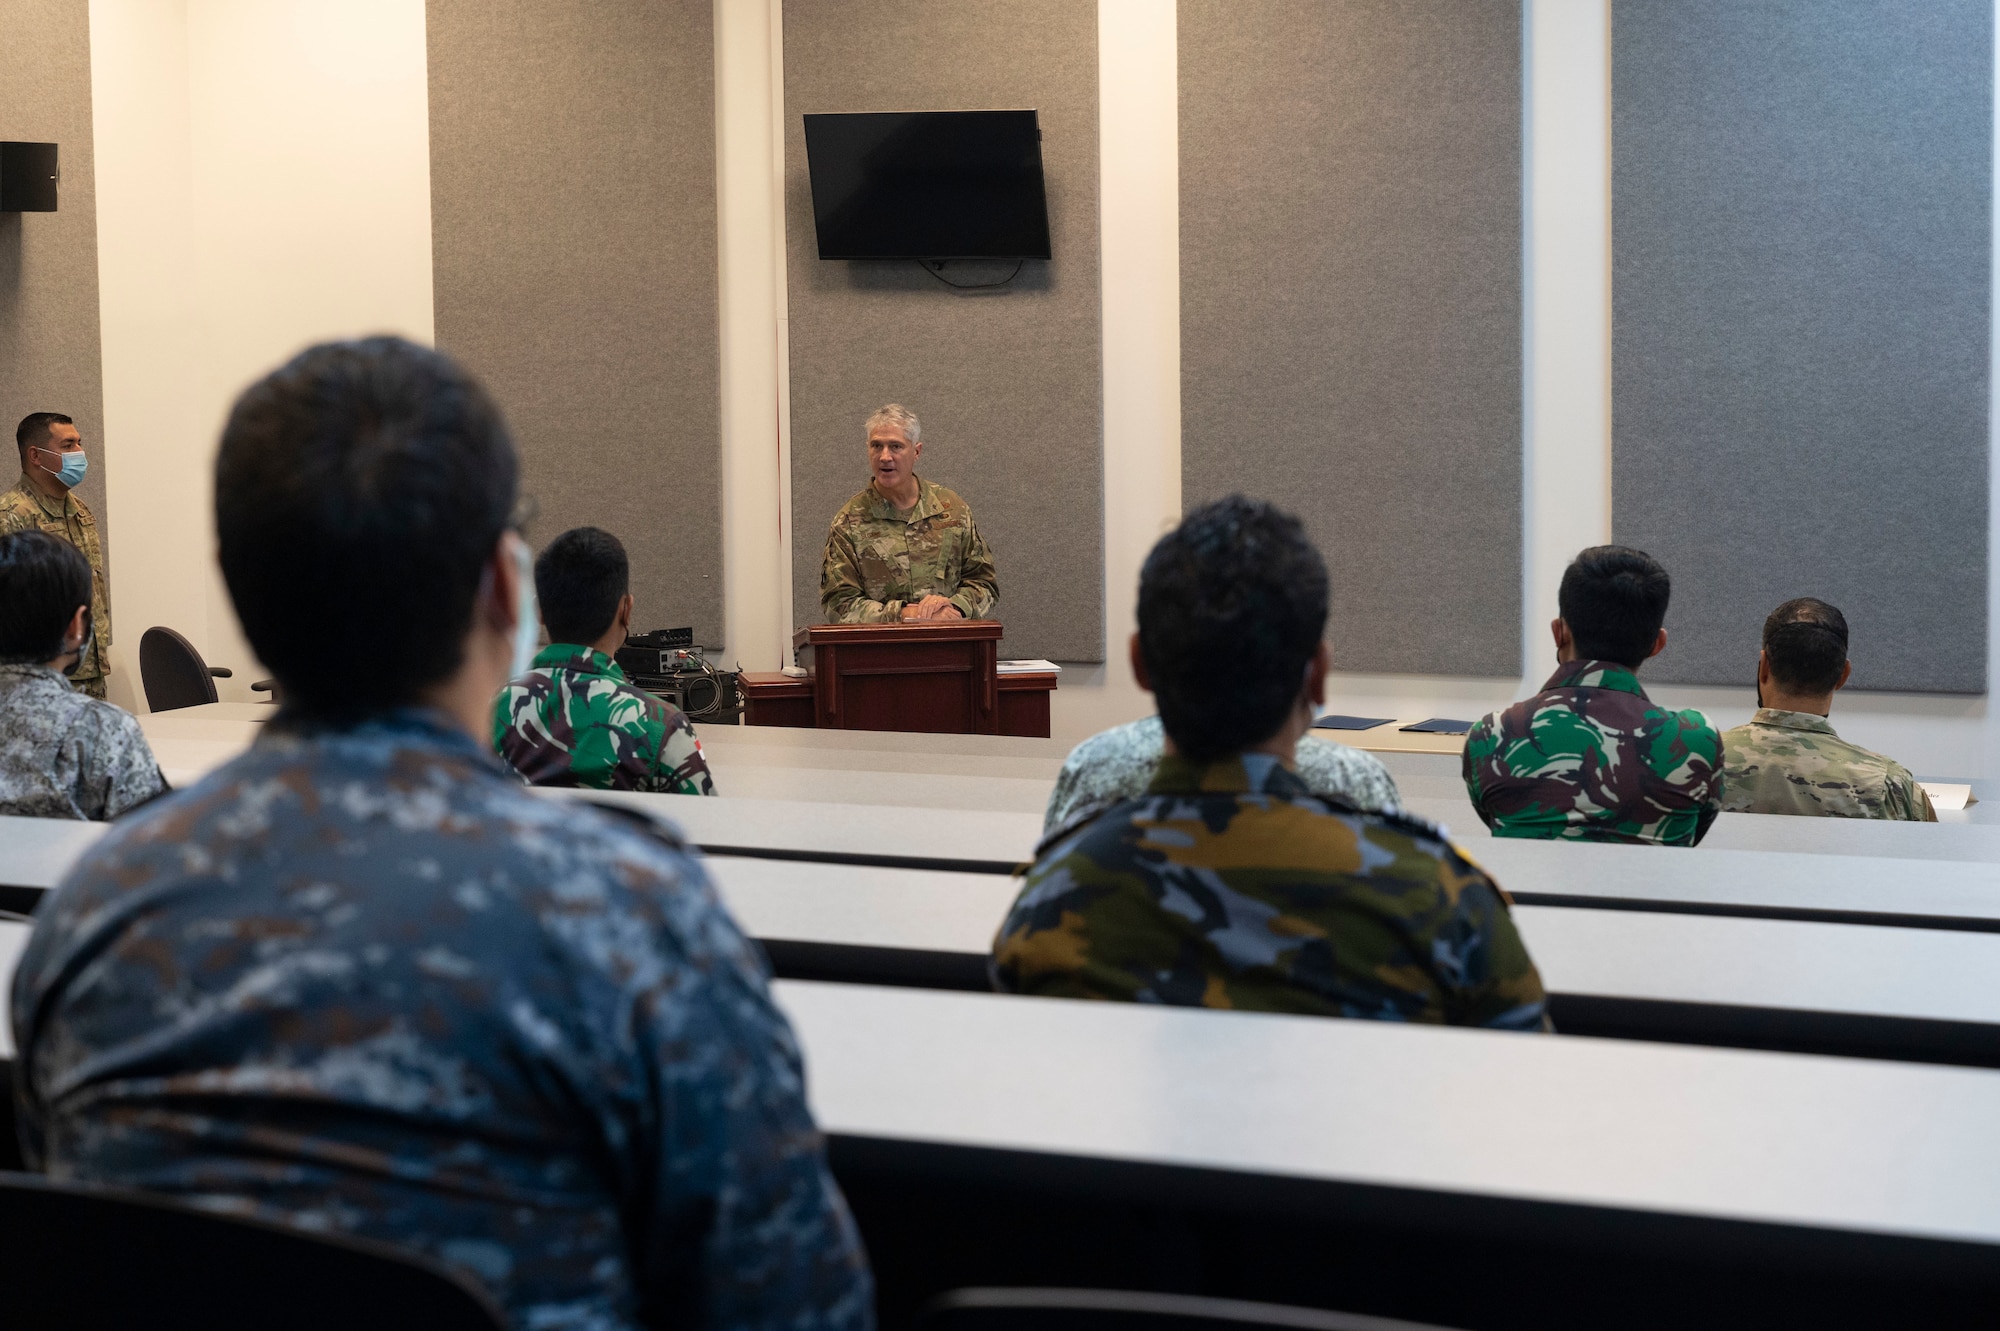 Brig. Gen. Jeremy Sloane, 36th Wing commander, speaks at the graduation of the Aircraft Maintenance Officer Course Event at Andersen Air Force Base, Guam, Aug. 20, 2021.